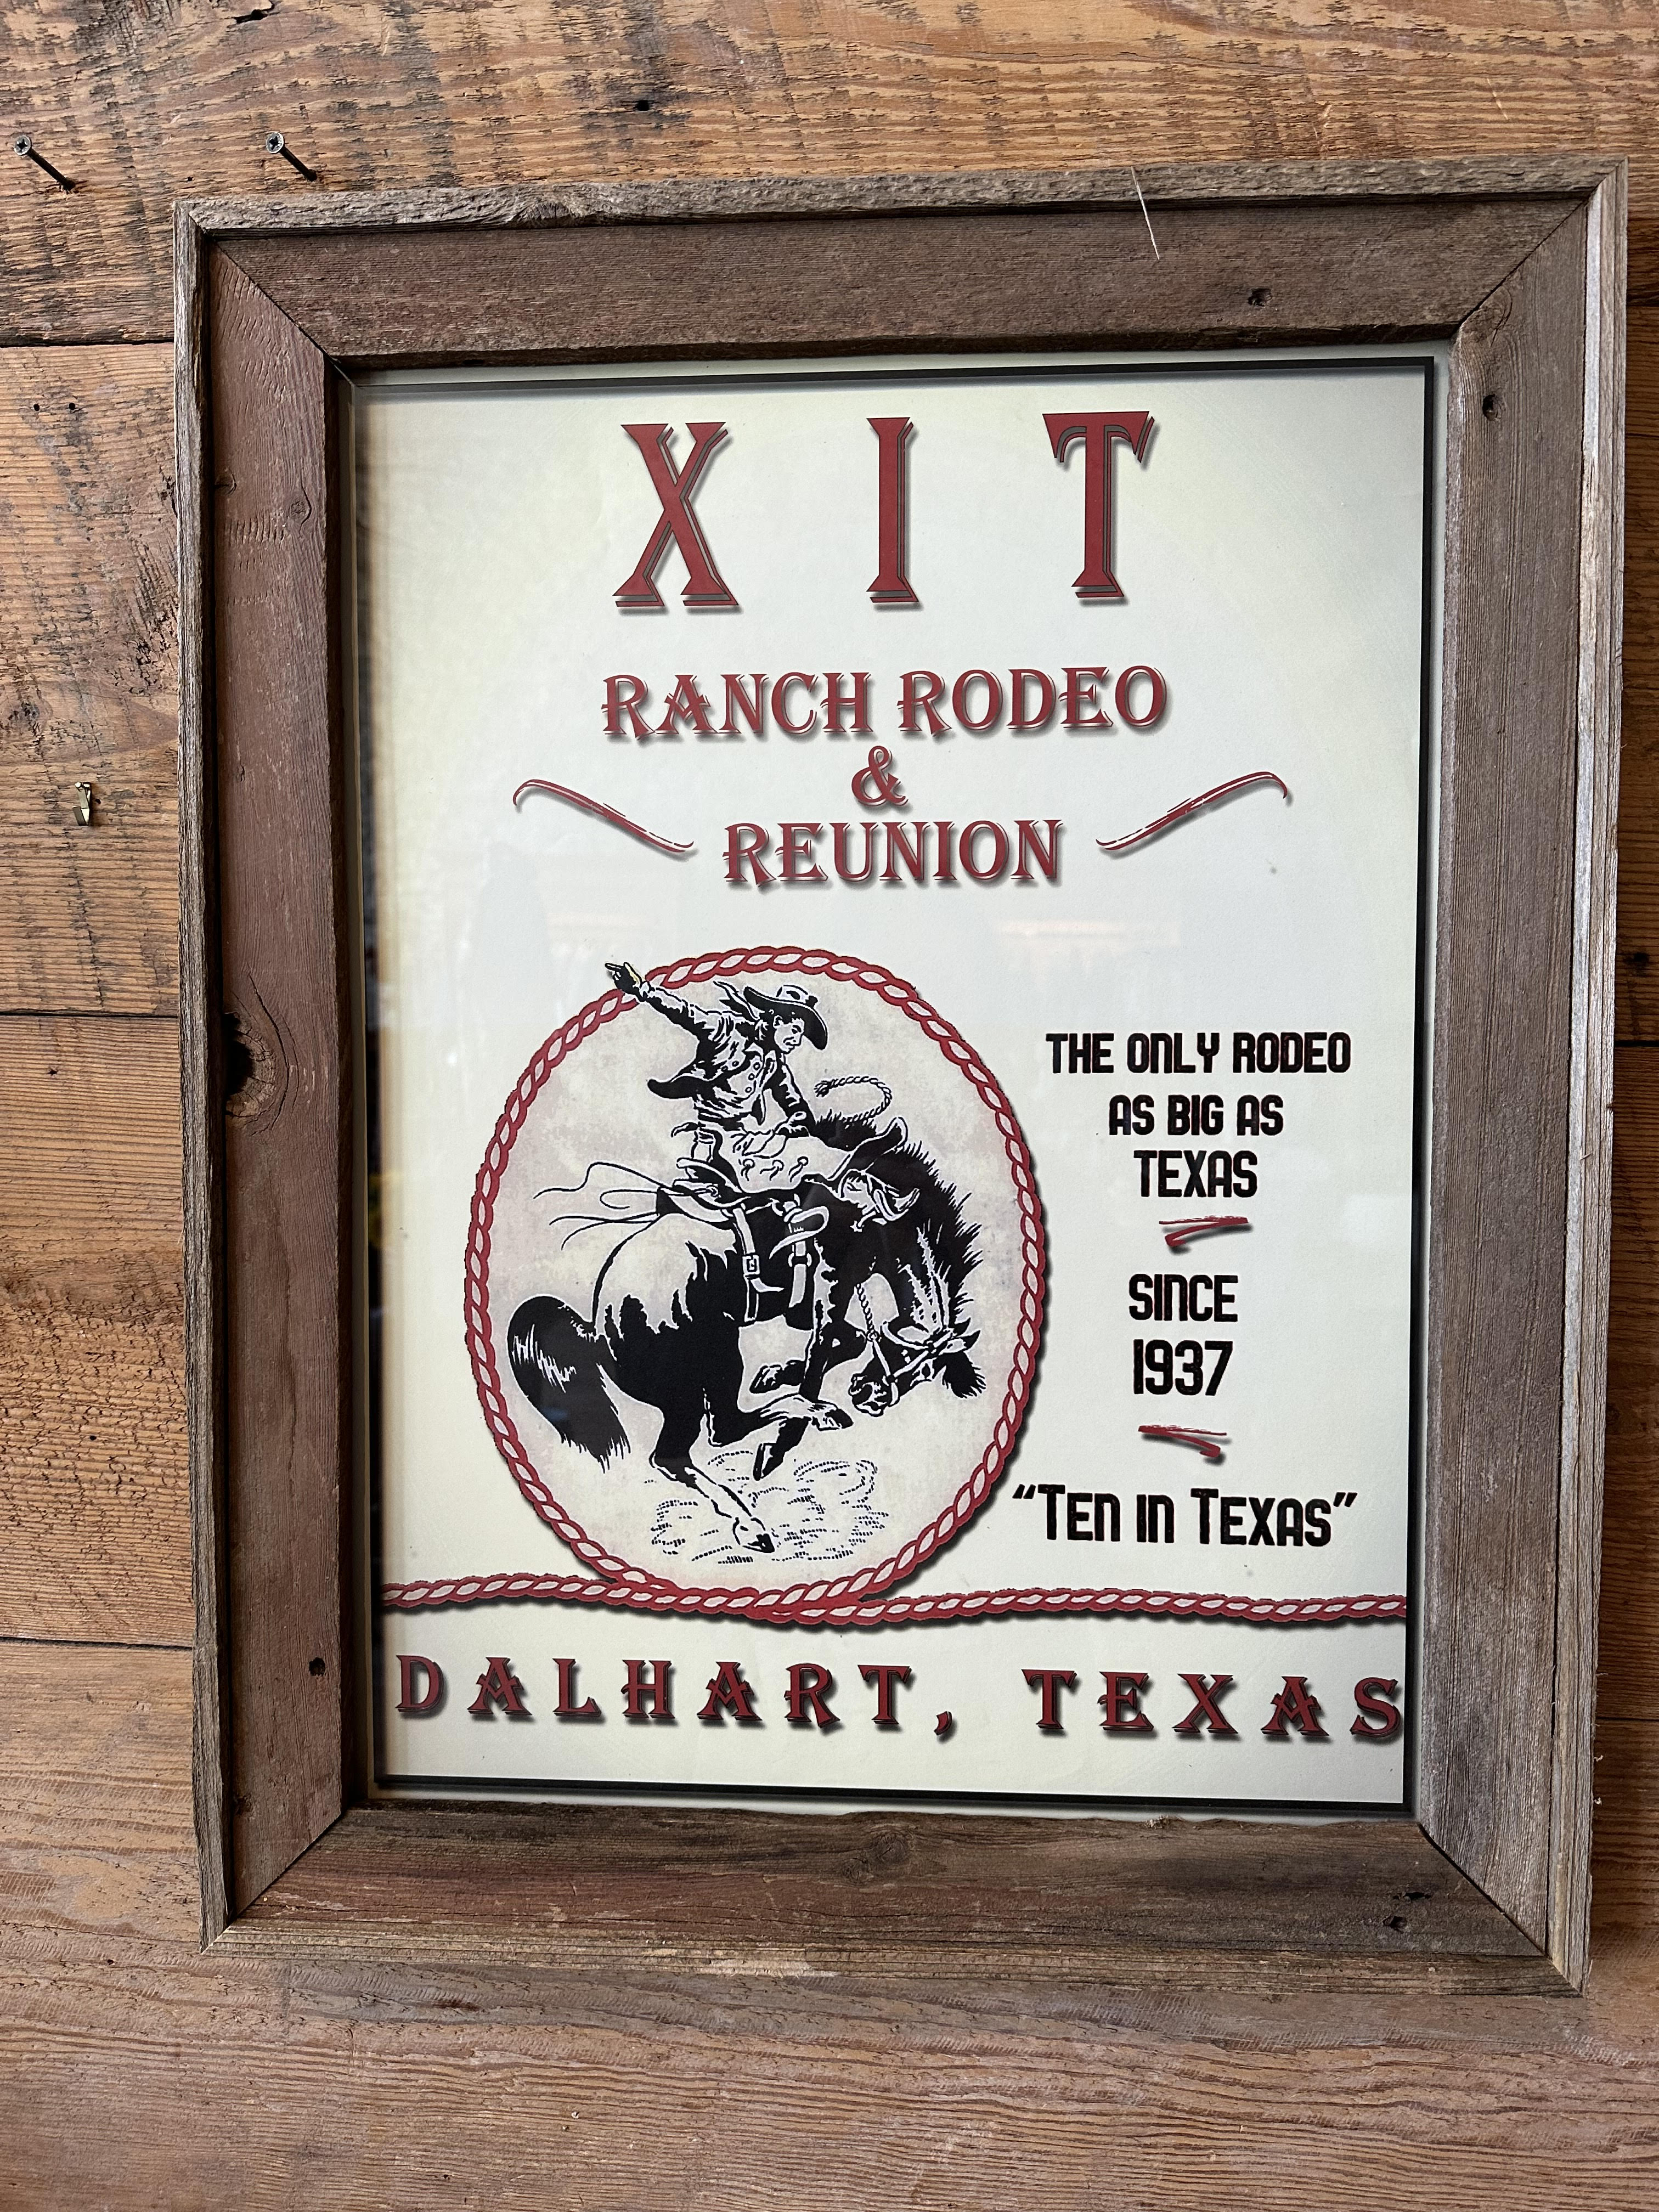 – Vintage Poster Blue Trading Rodeo Star